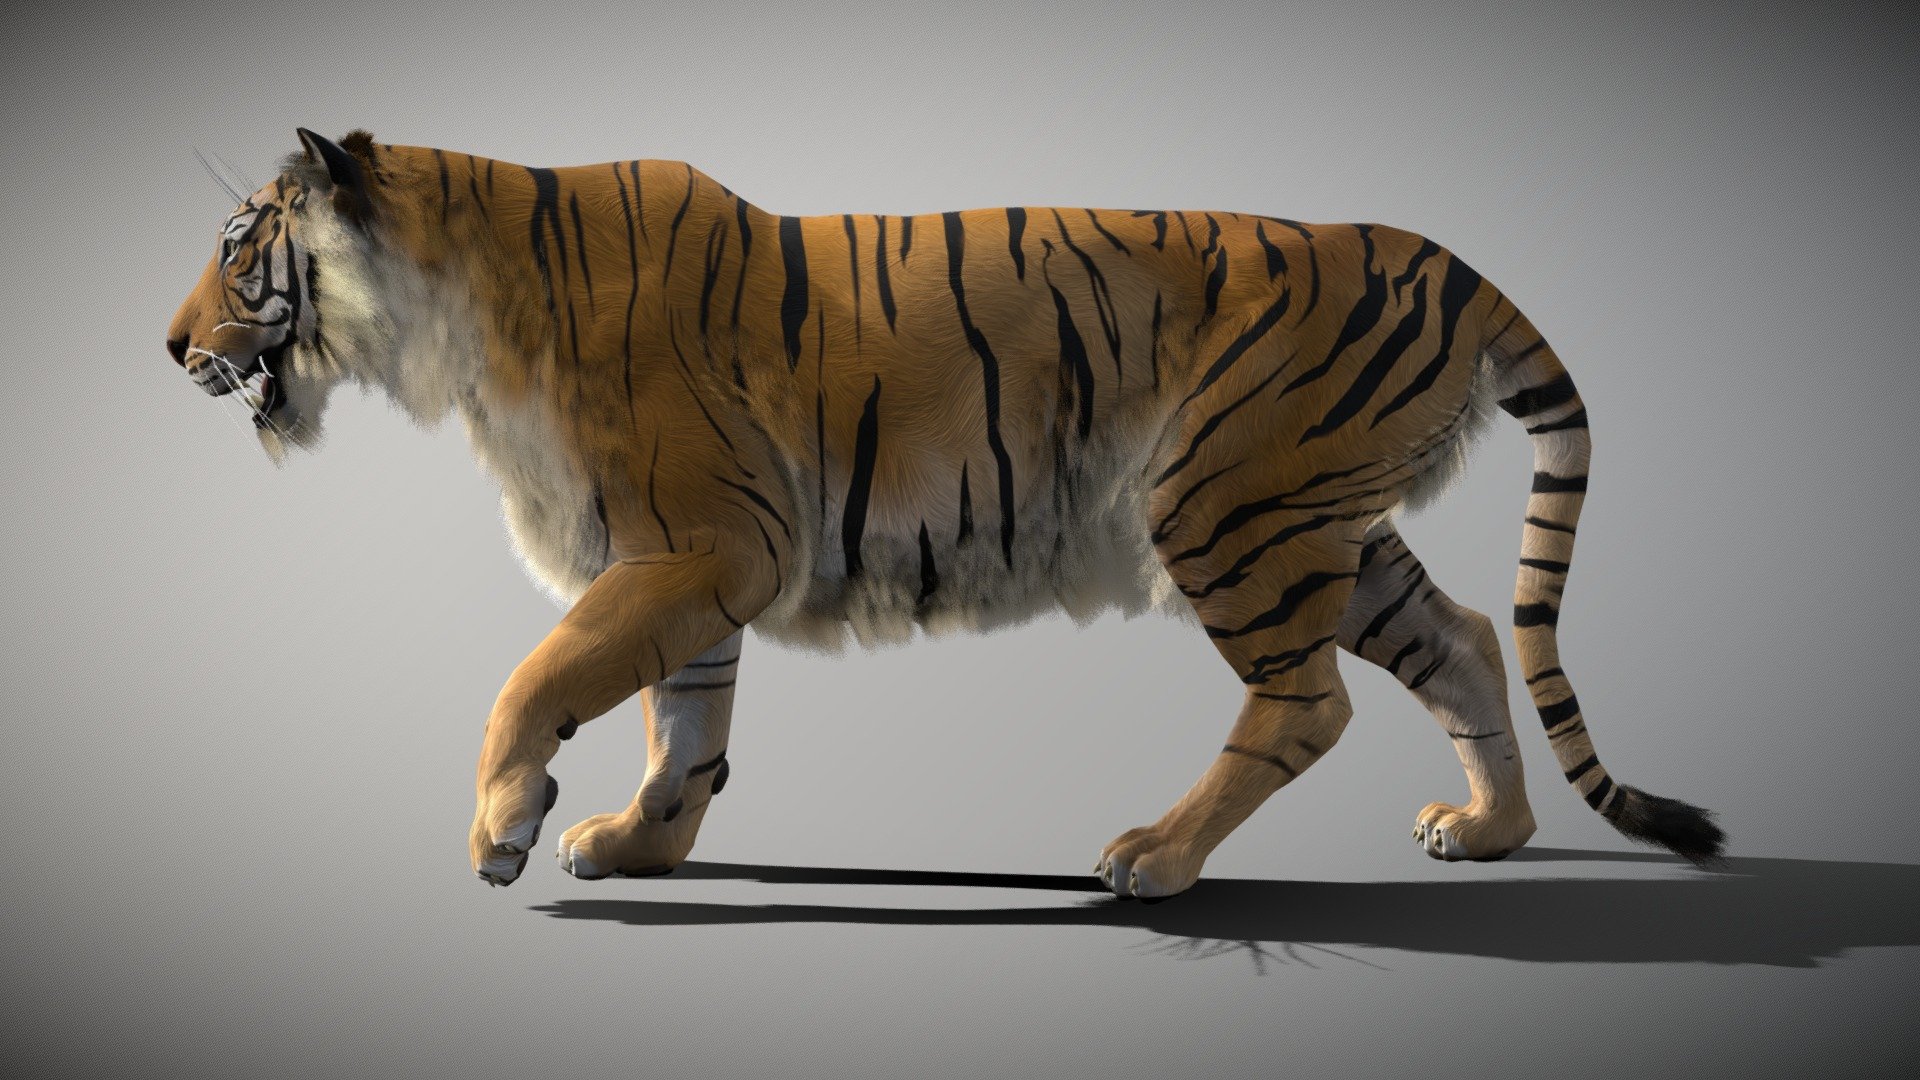 Tiger created in blender, zbrush and substance painter
Textures 4096 * 4096
5 animations: walk cycle, run cycle, roar, leftattack and right attack
original blender file linked

Wiki: The tiger (Panthera tigris) is the largest living cat species and a member of the genus Panthera. It is most recognisable for its dark vertical stripes on orange fur with a white underside. An apex predator, it primarily preys on ungulates such as deer and wild boar. It is territorial and generally a solitary but social predator, requiring large contiguous areas of habitat, which support its requirements for prey and rearing of its offspring. Tiger cubs stay with their mother for about two years, then become independent and leave their mother’s home range to establish their own - Tiger 1.2 - Buy Royalty Free 3D model by creatureFab (@3dCoast) 3d model